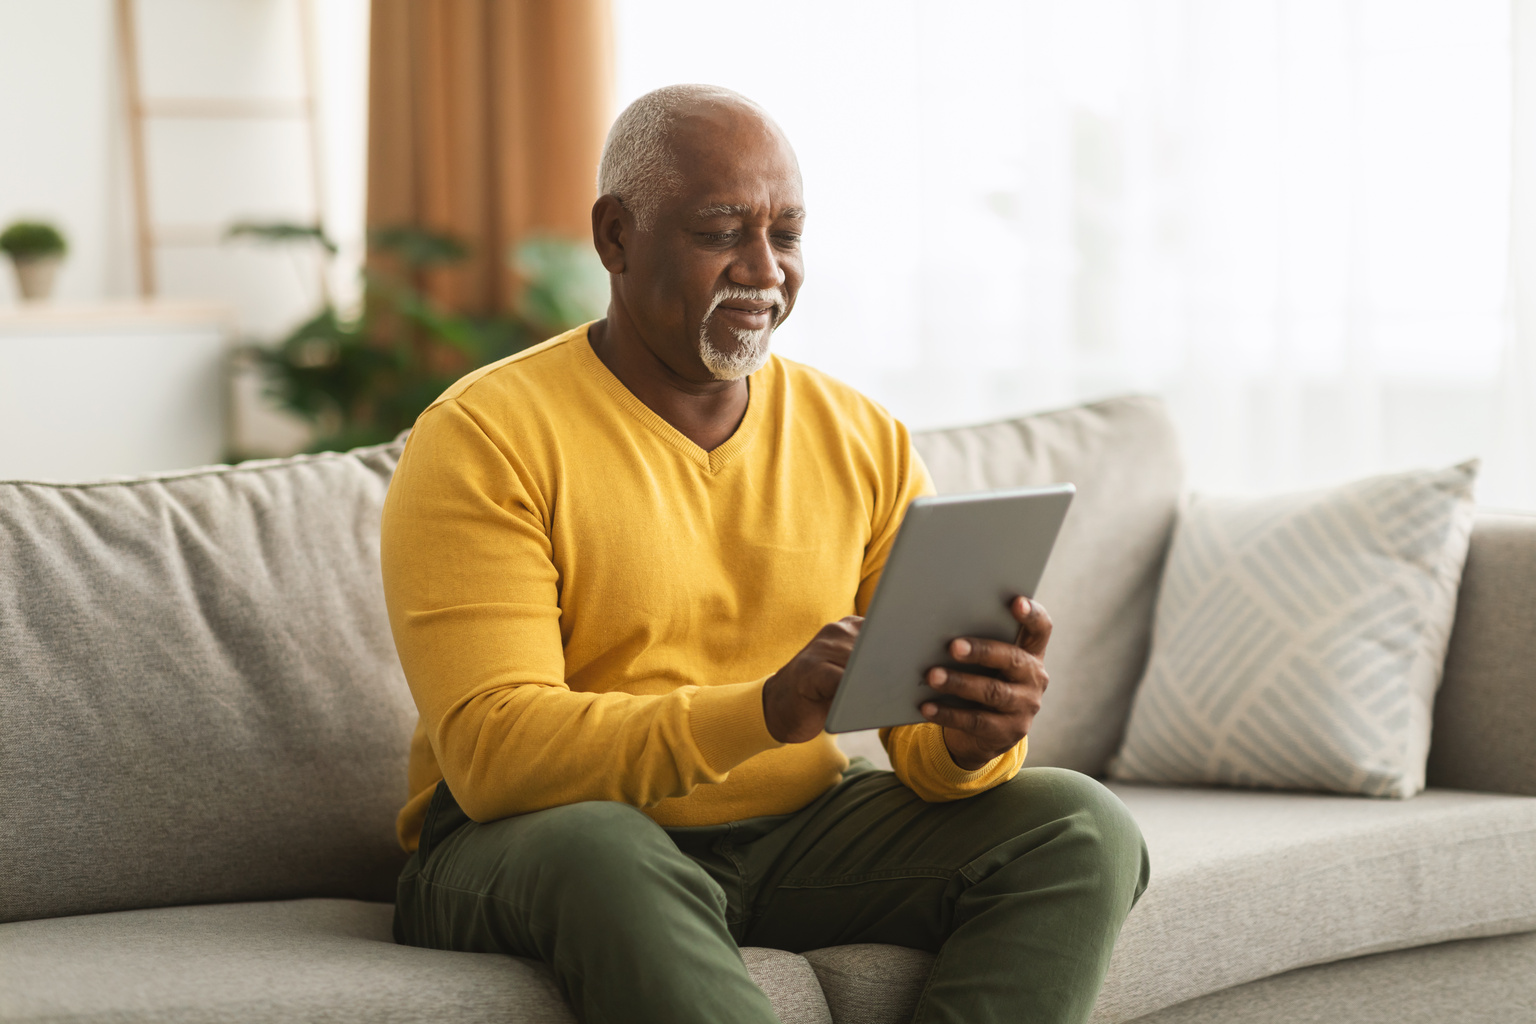 A pleasant older male sitting on a couch looking at a tablet.